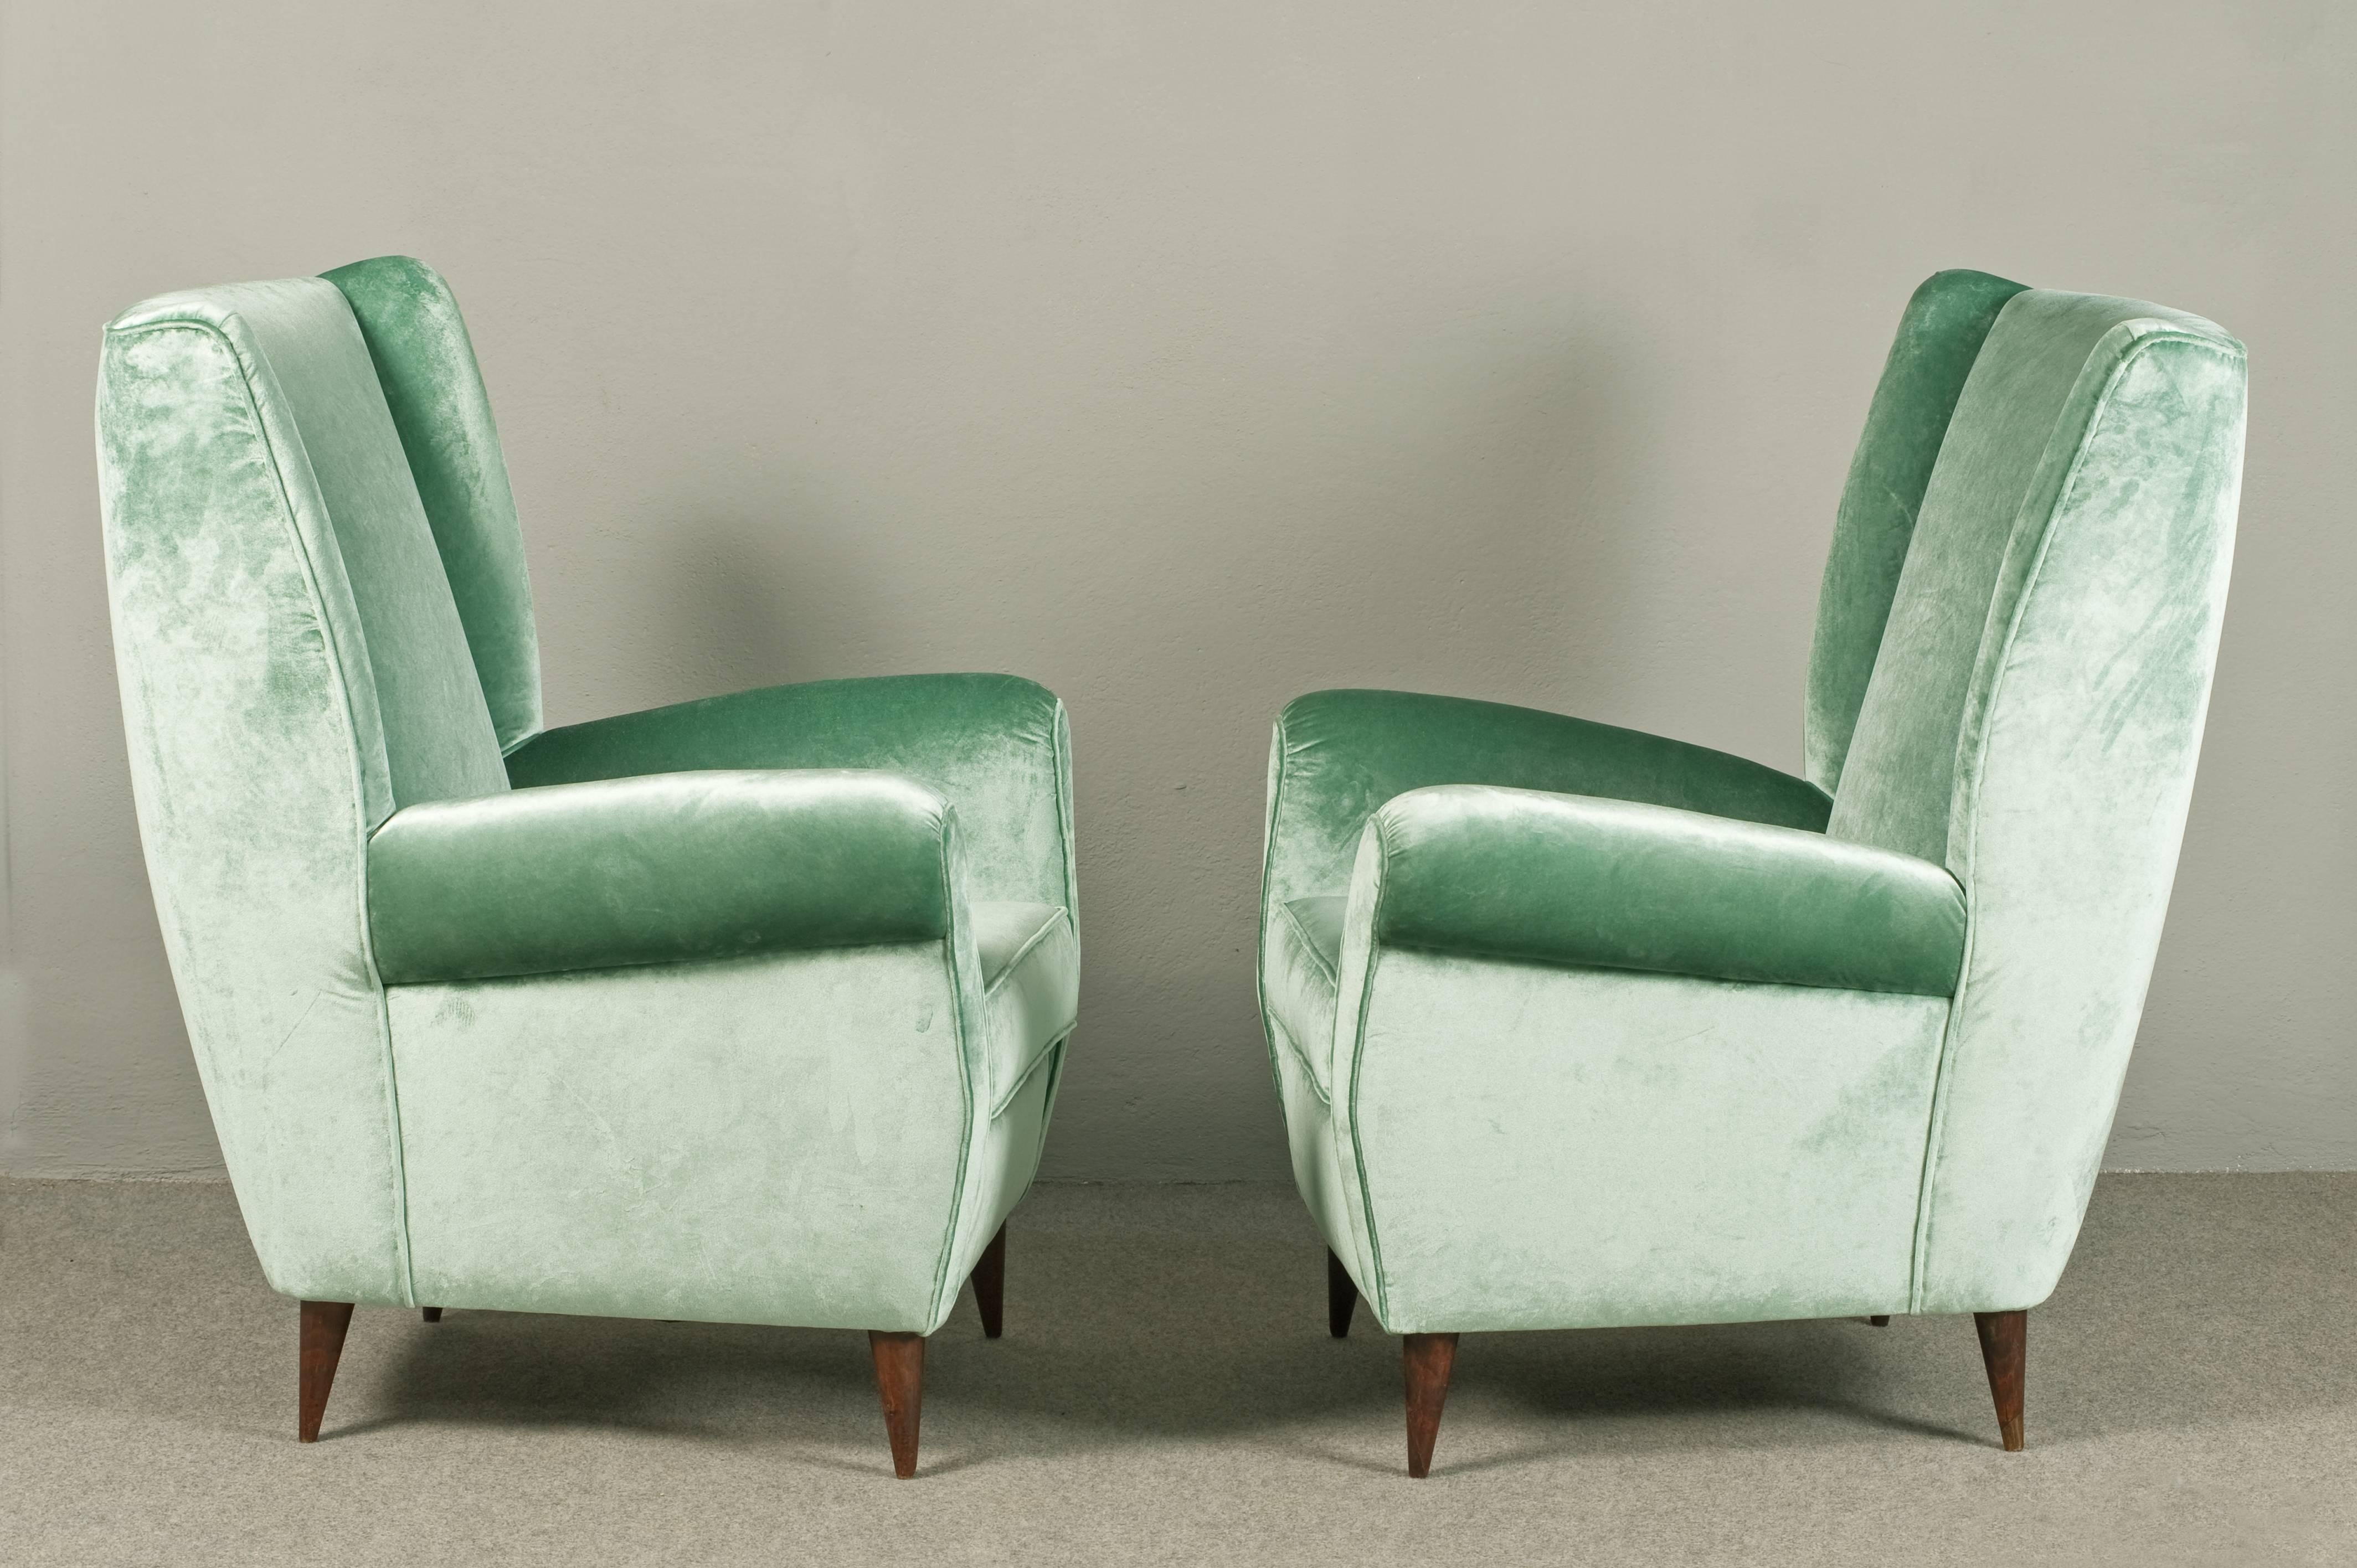 Elegant pair of Gio Ponti armchairs.
Reupholstered in Velvet and silk. 
Expertise archives.